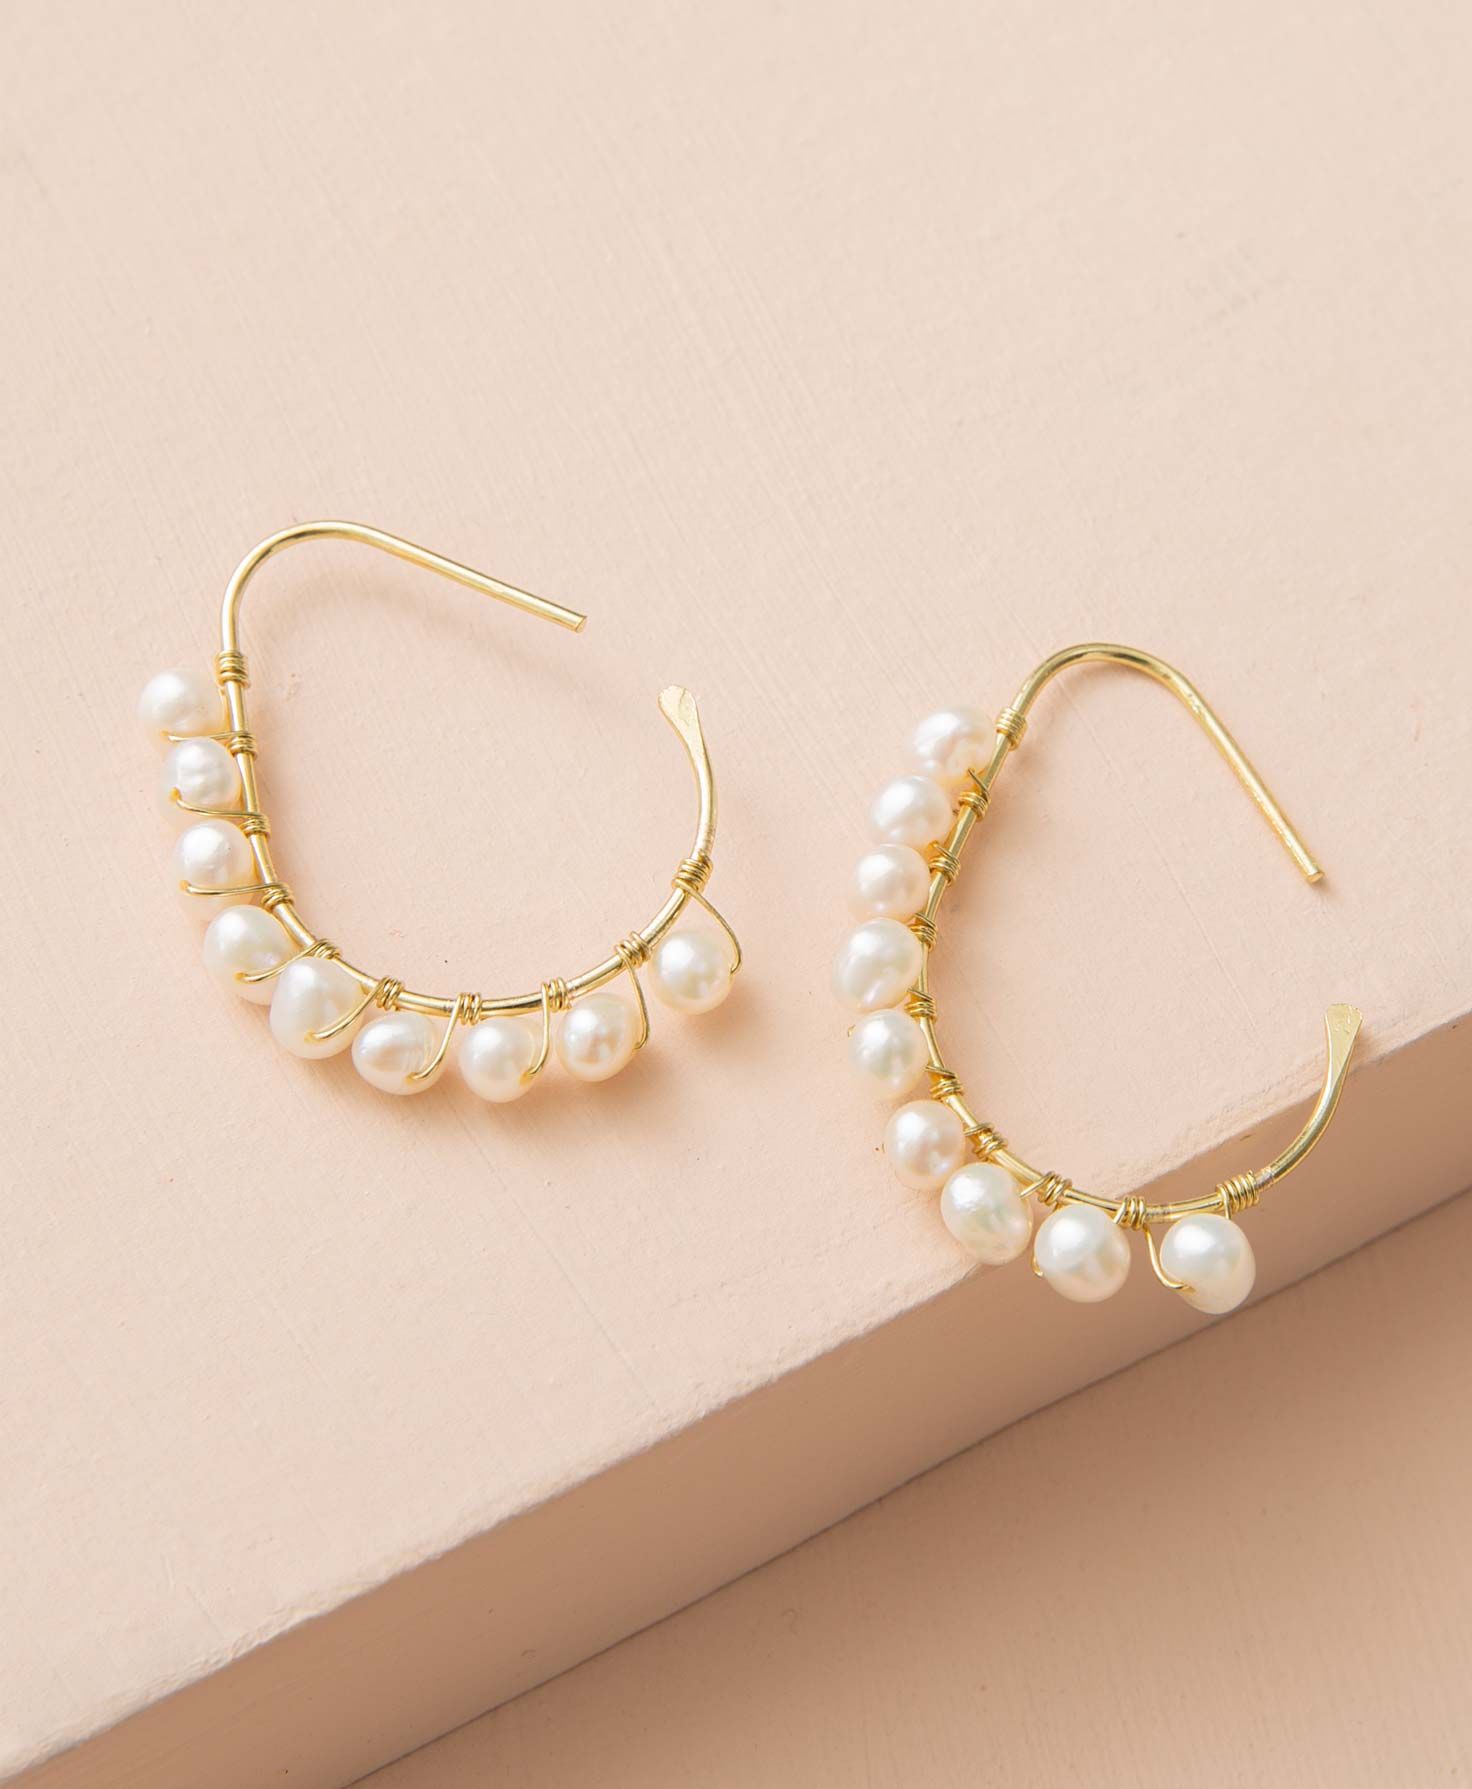 League Earrings | Noonday Collection